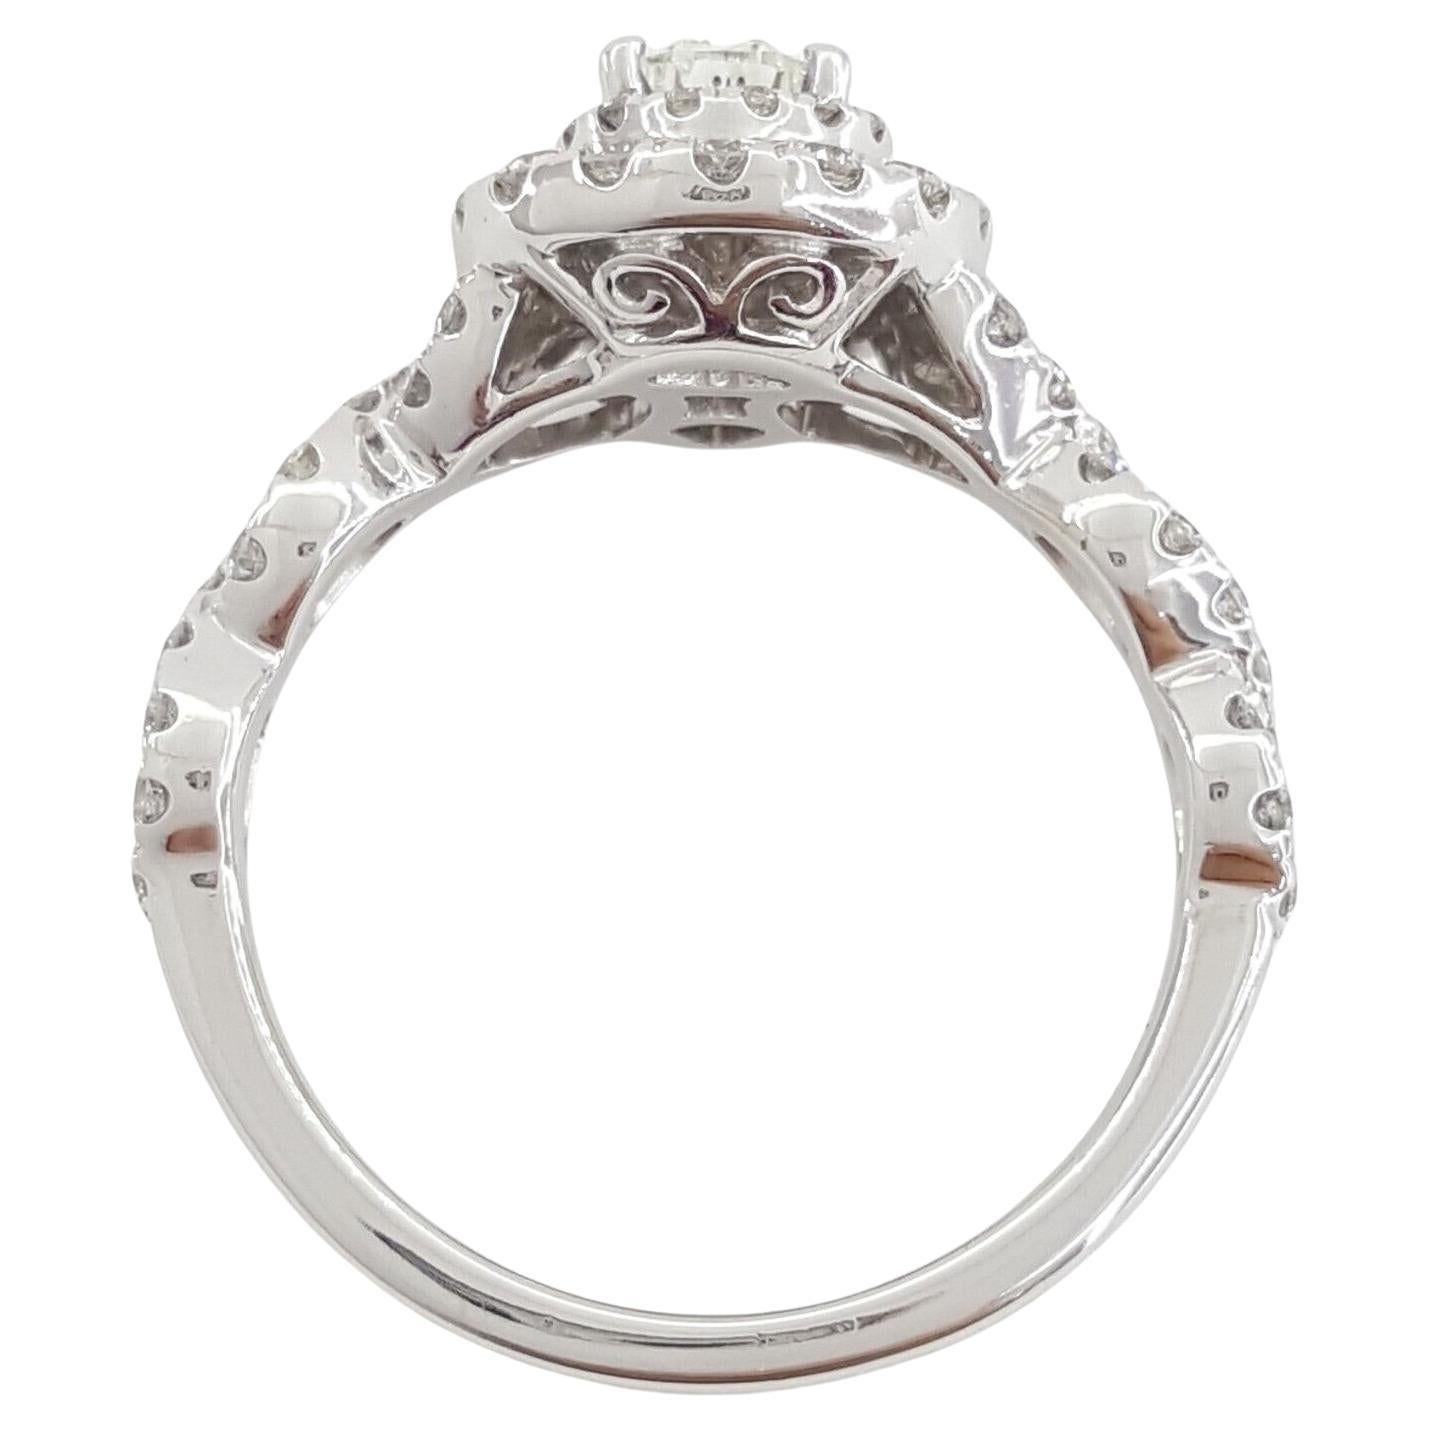 Neil Lane Bridal® Collection, an exquisite engagement ring in 14k white gold, featuring a total diamond weight of 1.14 carats. Weighing 4.2 grams and sized at 6.5, this captivating ring showcases a natural Pear Brilliant Cut center diamond,